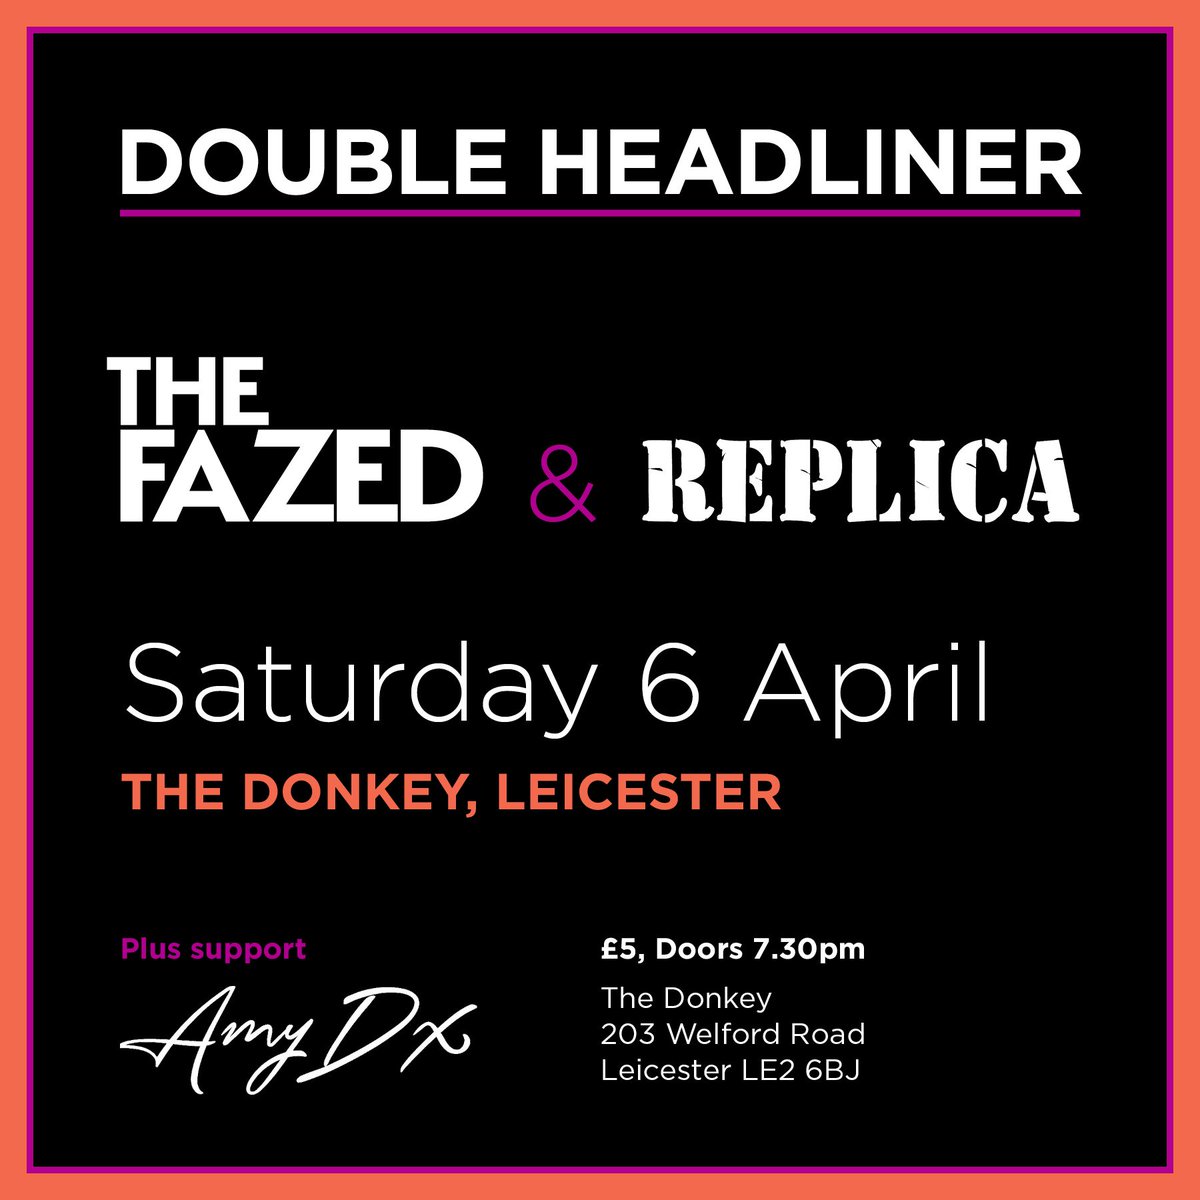 New poster for The Fazed and Replica double headliner with Amy Dx opening the show! 👊 #livemusic #leicestermusic #independentartist Artwork by Lucy Fox